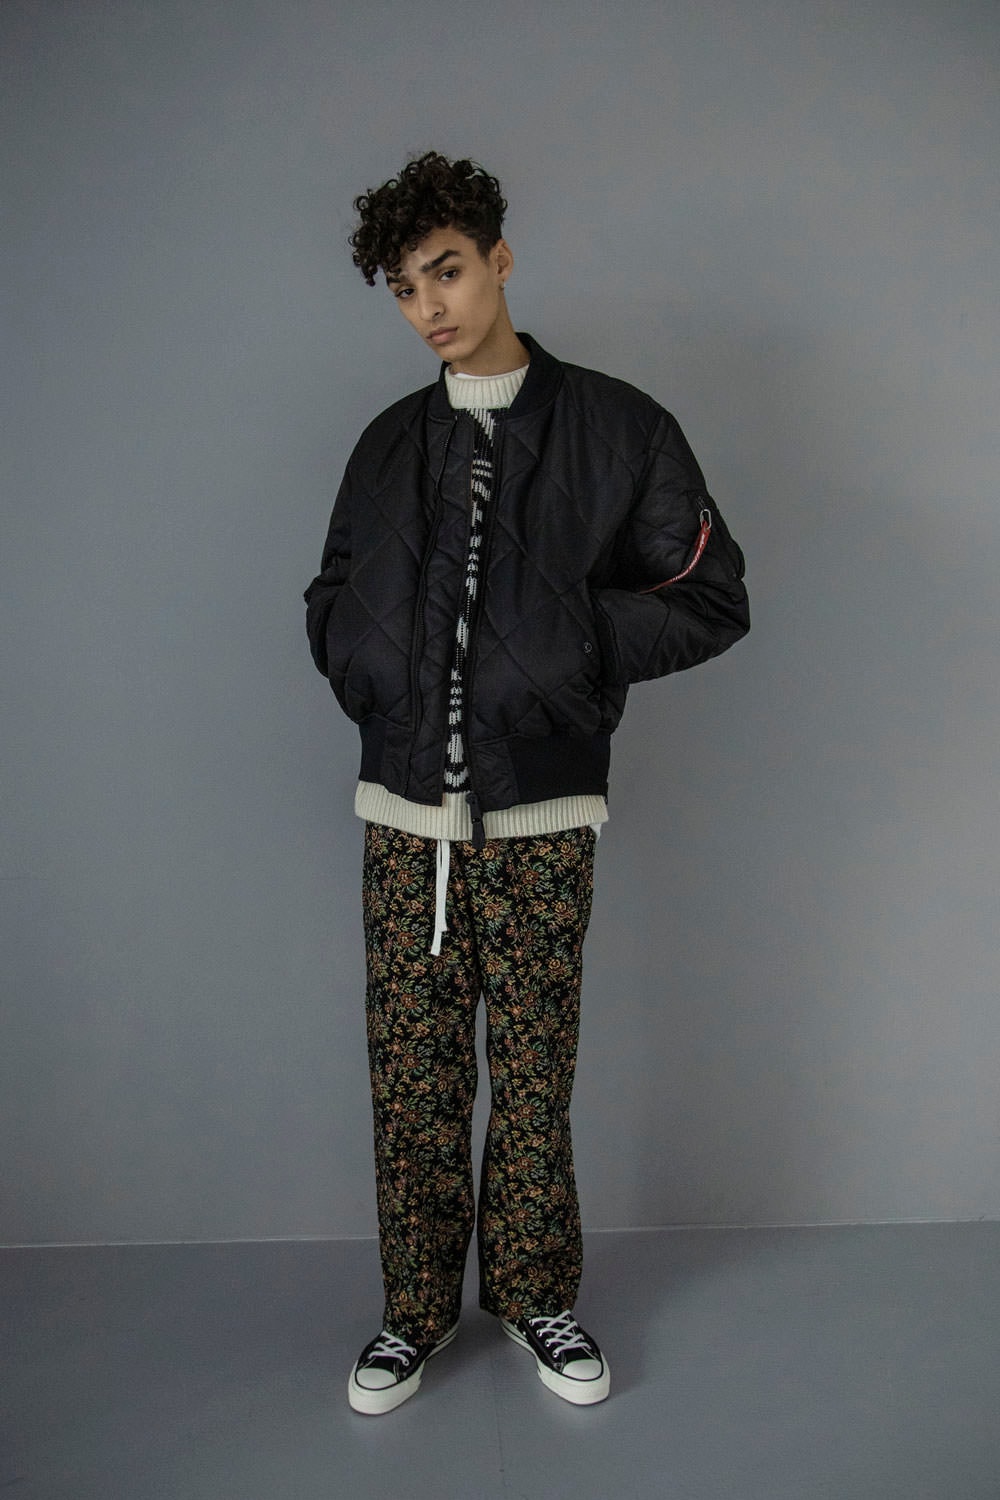 monkey time wrangler skookum champion discus alpha industries collection capsule japan bomber varsity jacket floral pants flare bottoms vests united arrows fw21 fall winter release info